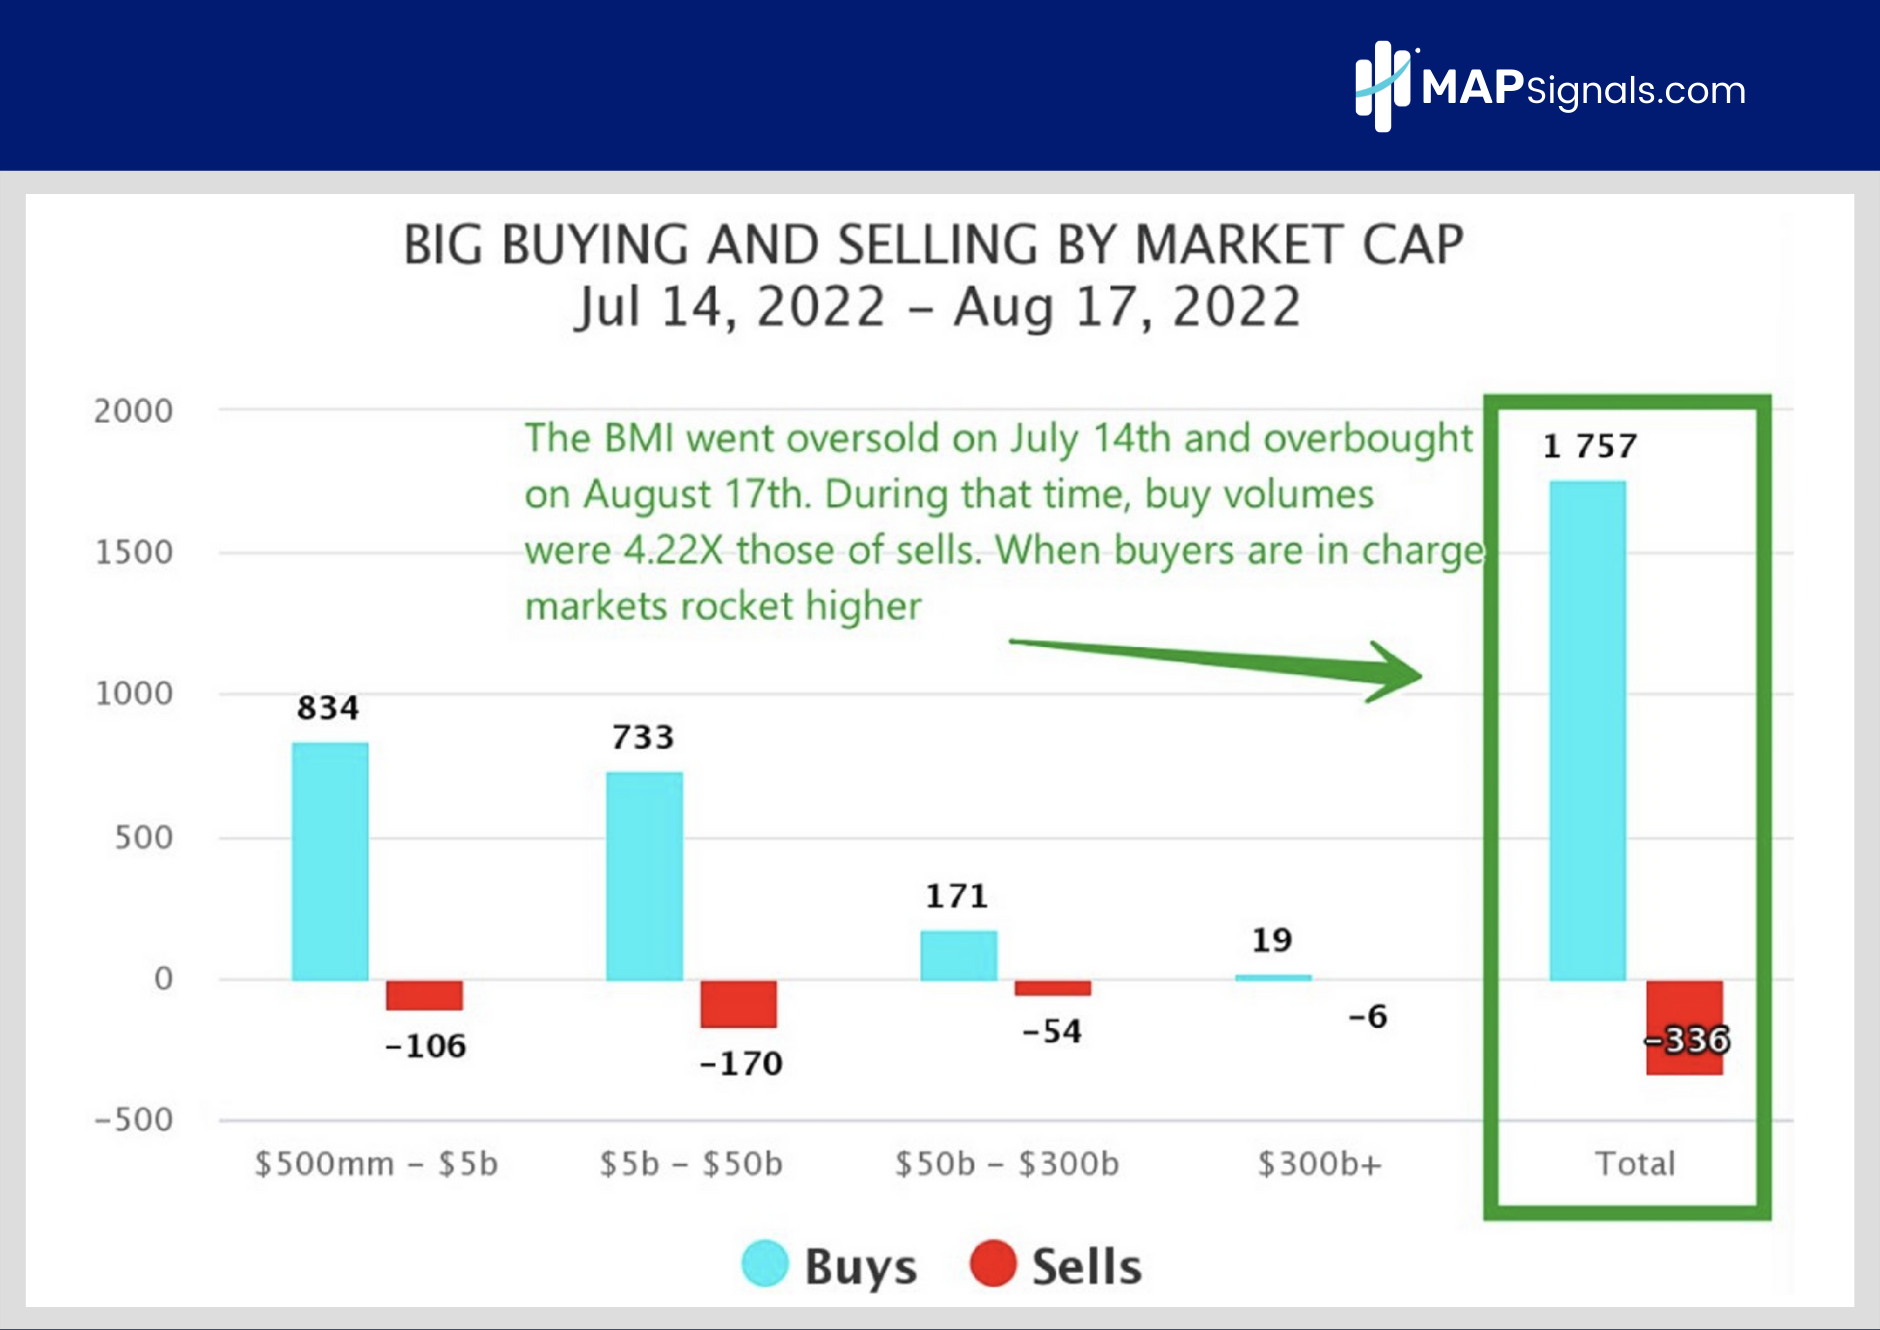 Big Money Buying and Selling by Market Cap Jul 14 - 17 | 2022